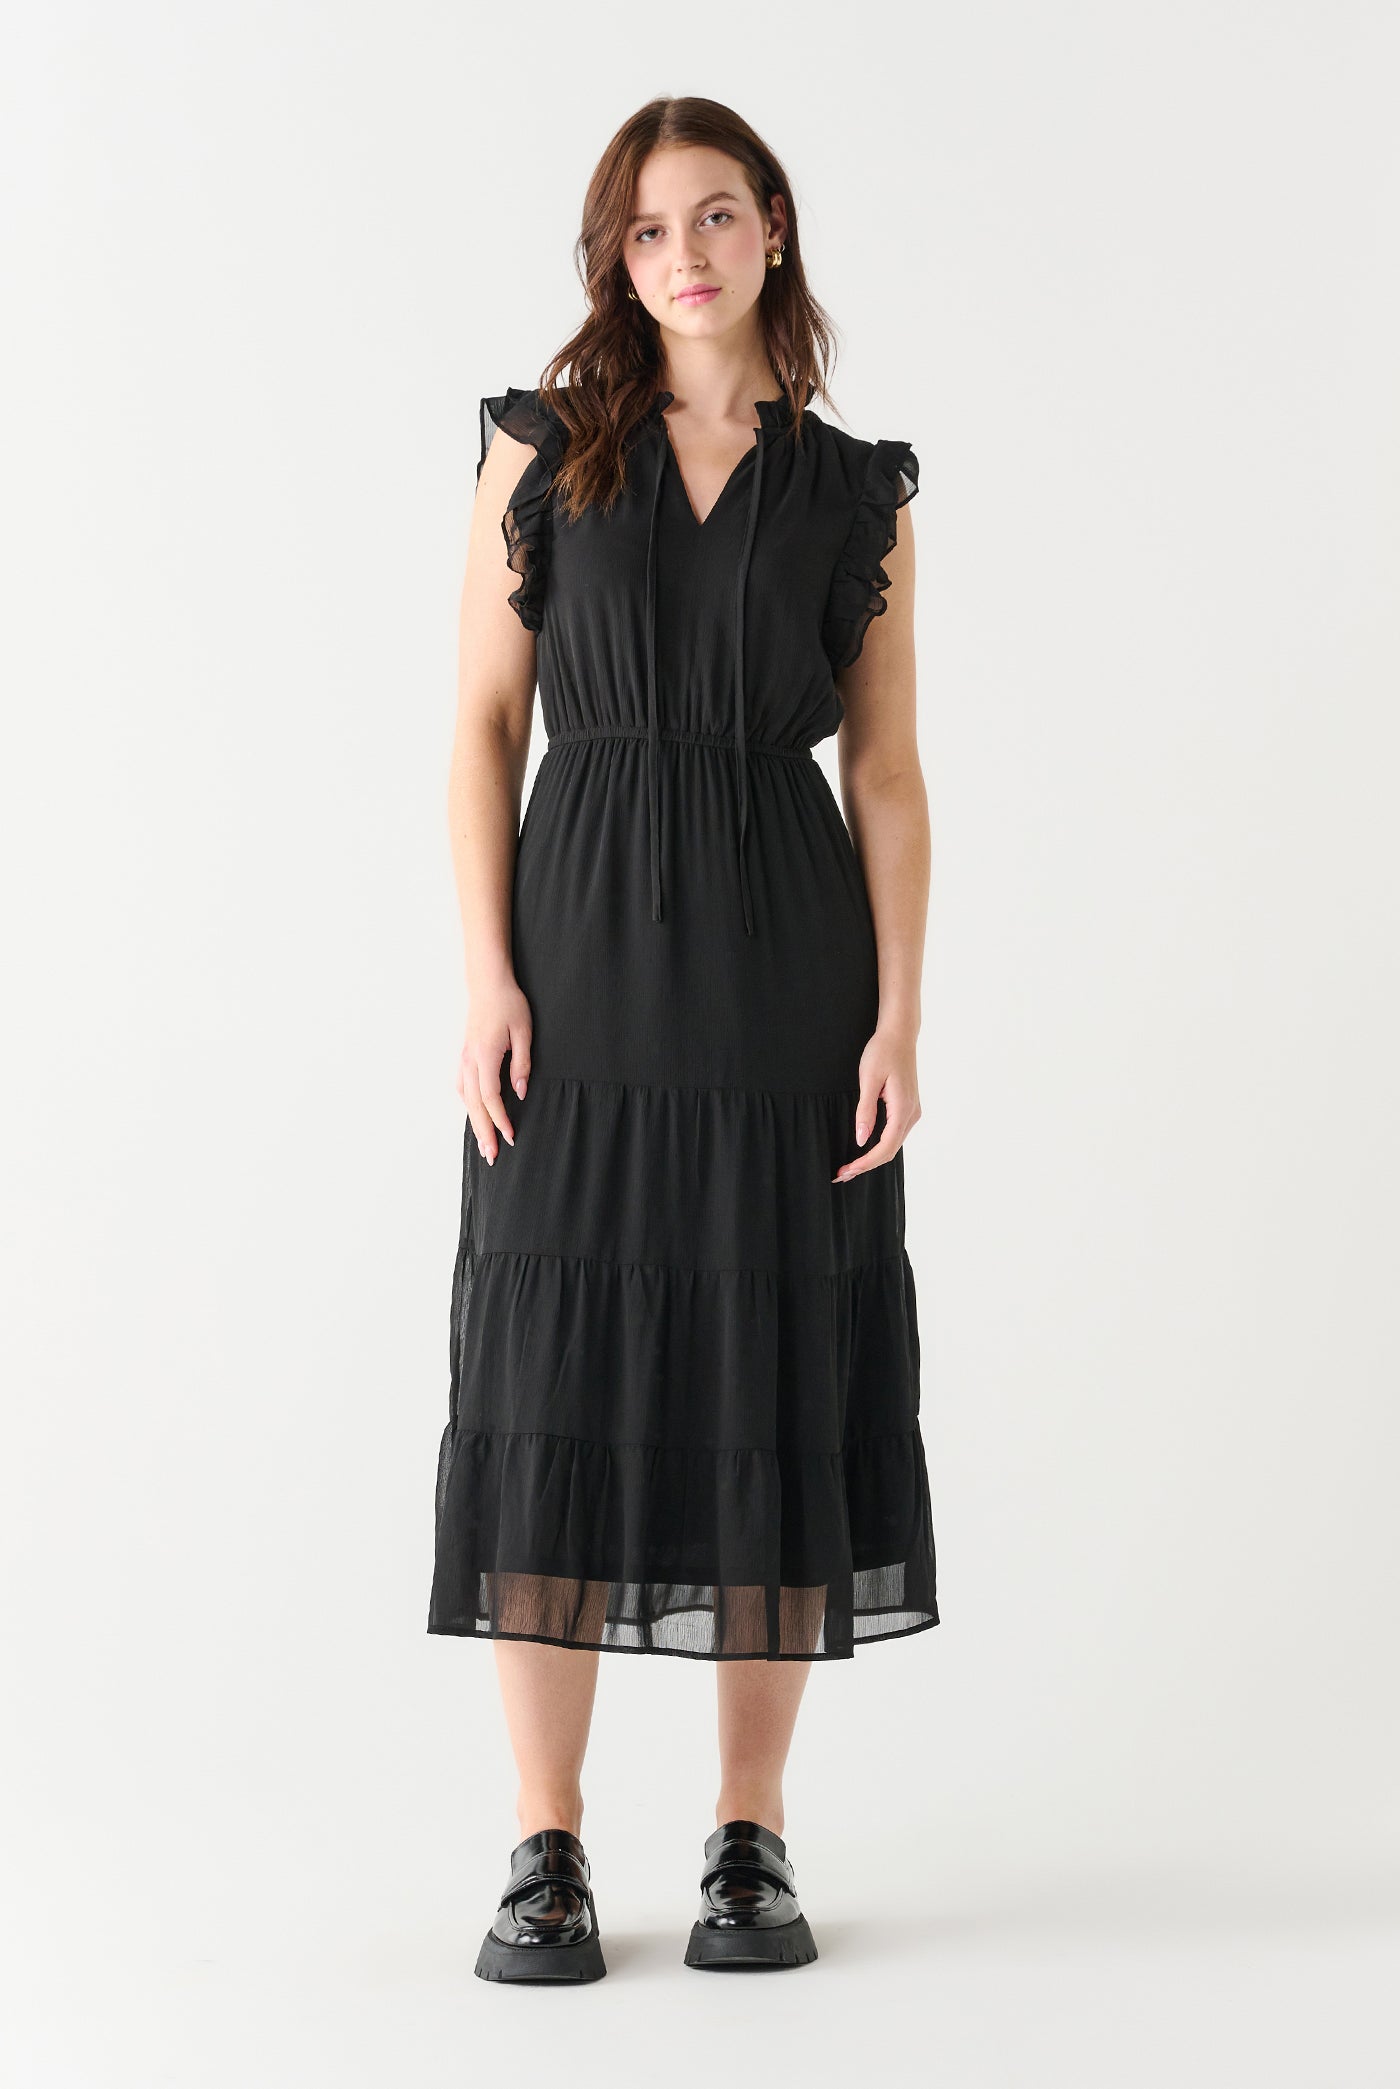 Nightfall Ruffled Sleeved Maxi Dress-Dresses-Vixen Collection, Day Spa and Women's Boutique Located in Seattle, Washington